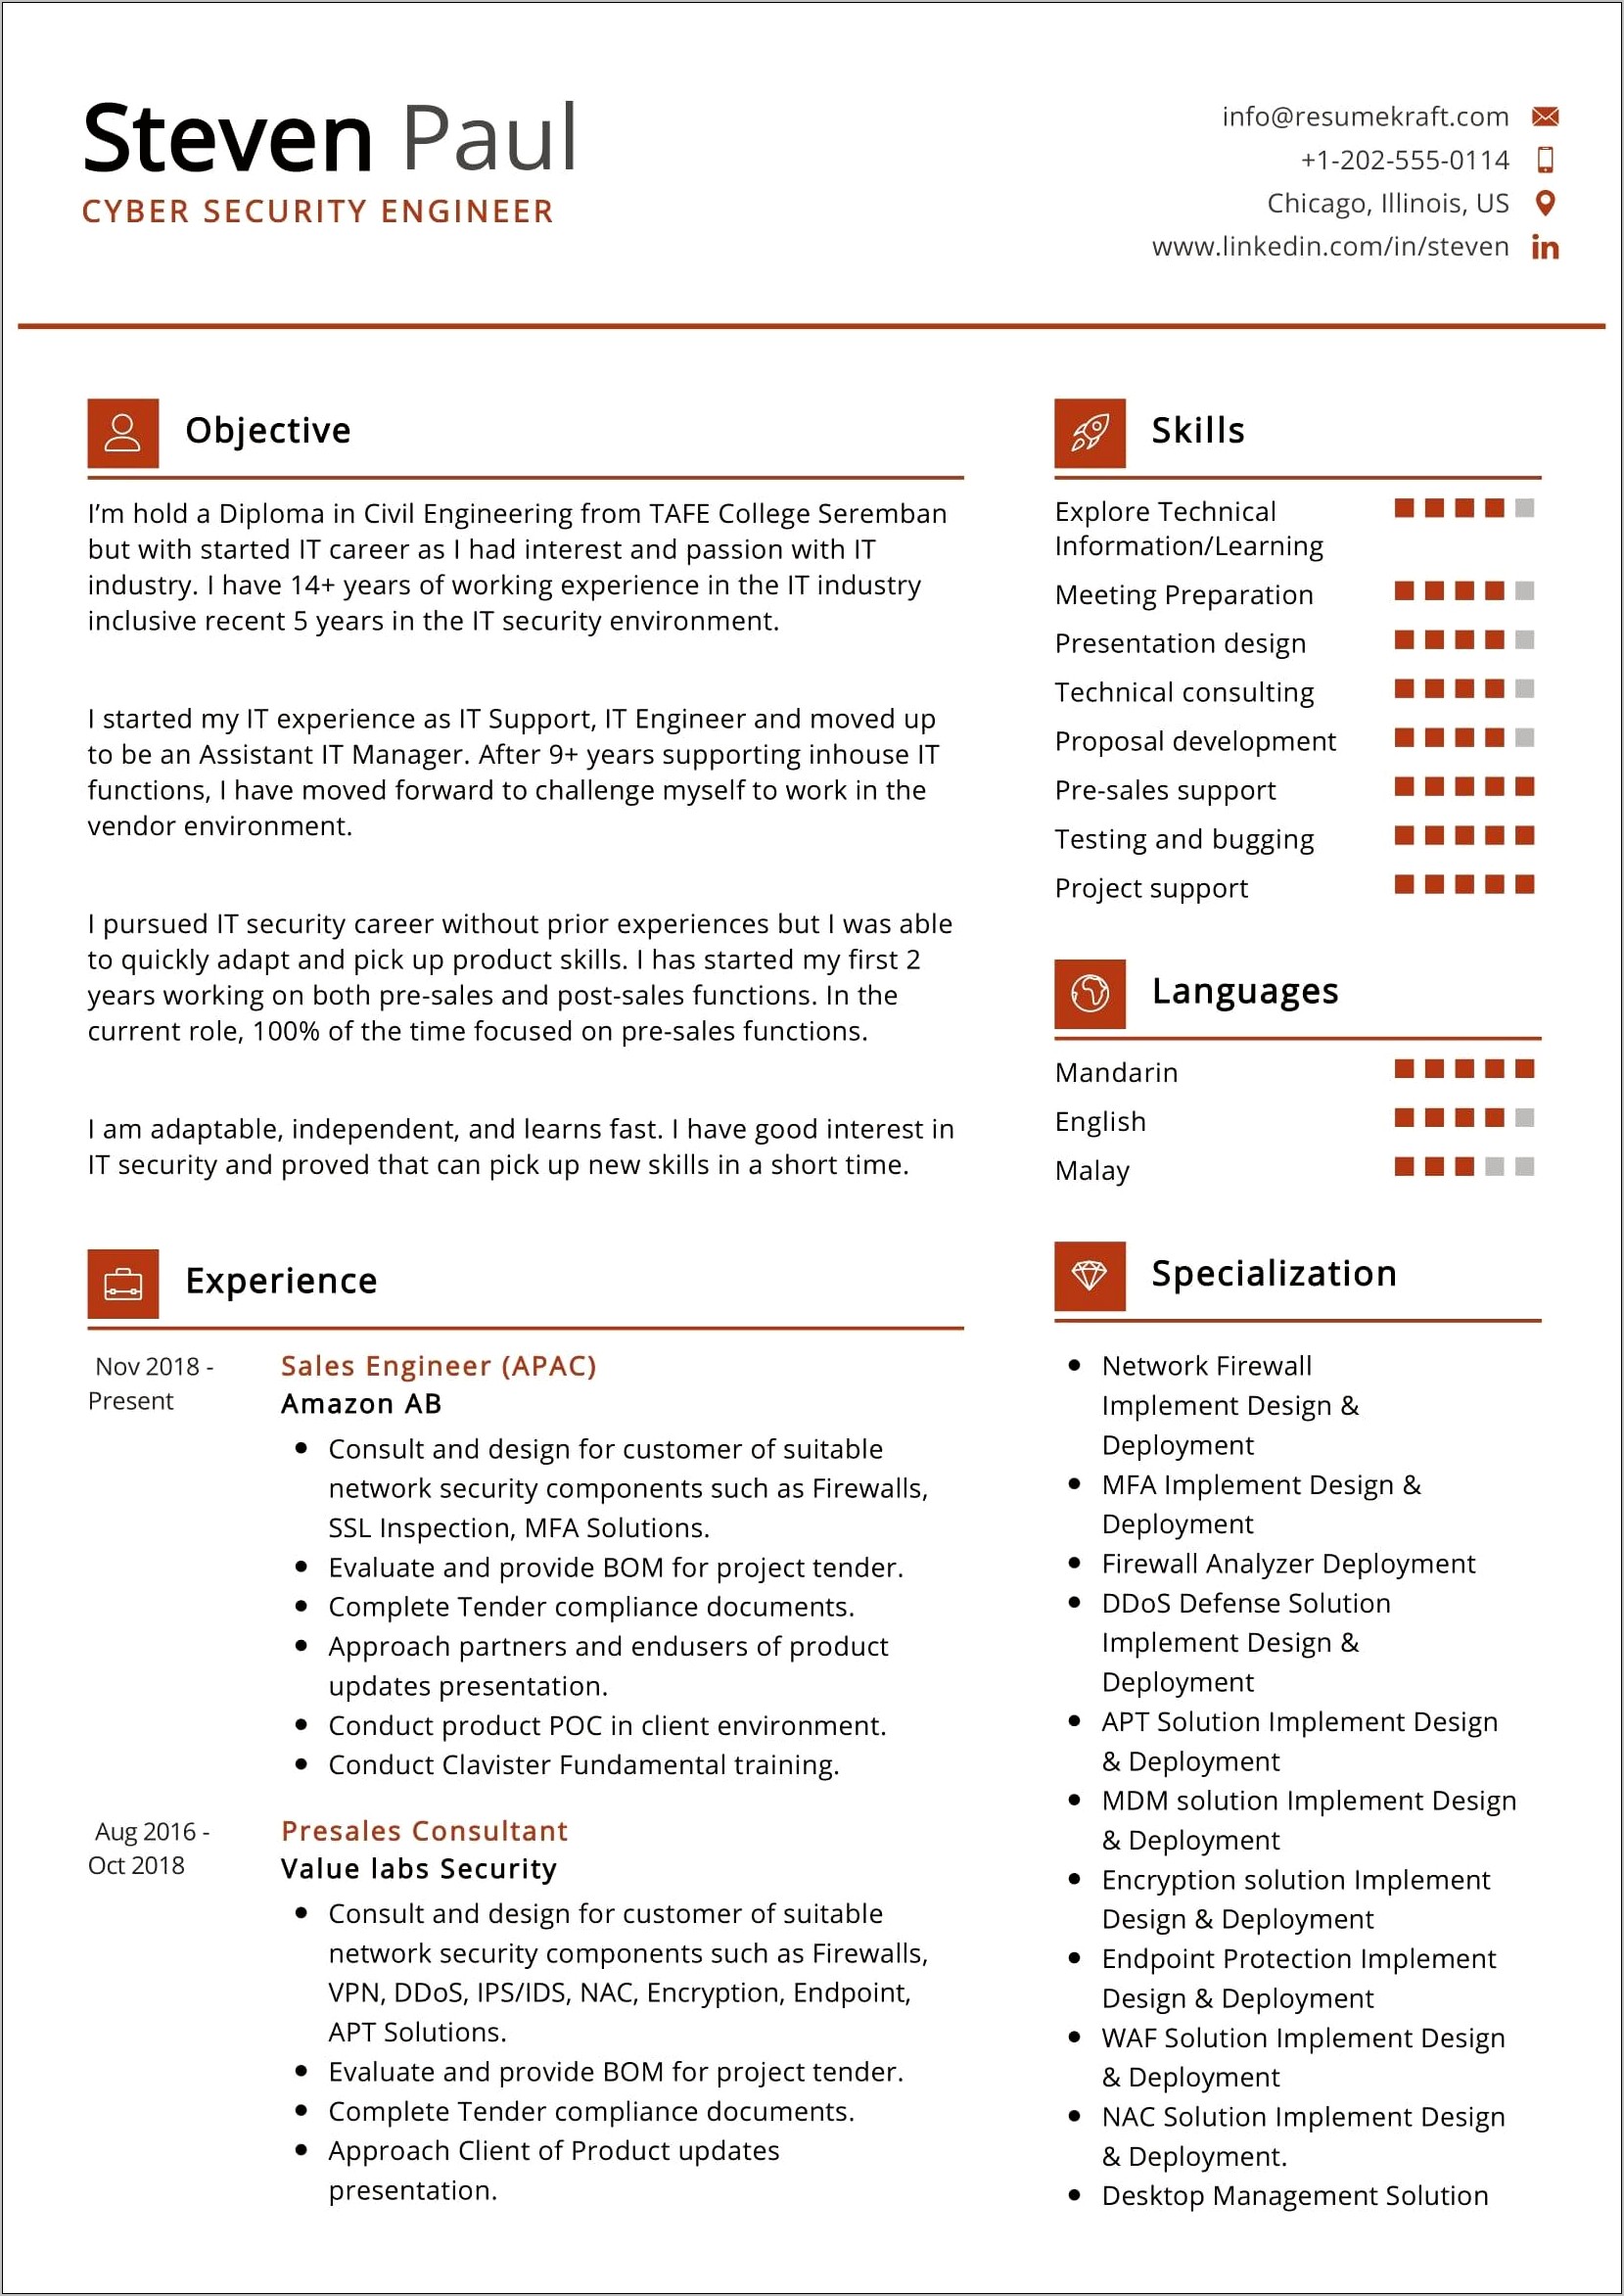 Cyber Security Project Based Resume Sample